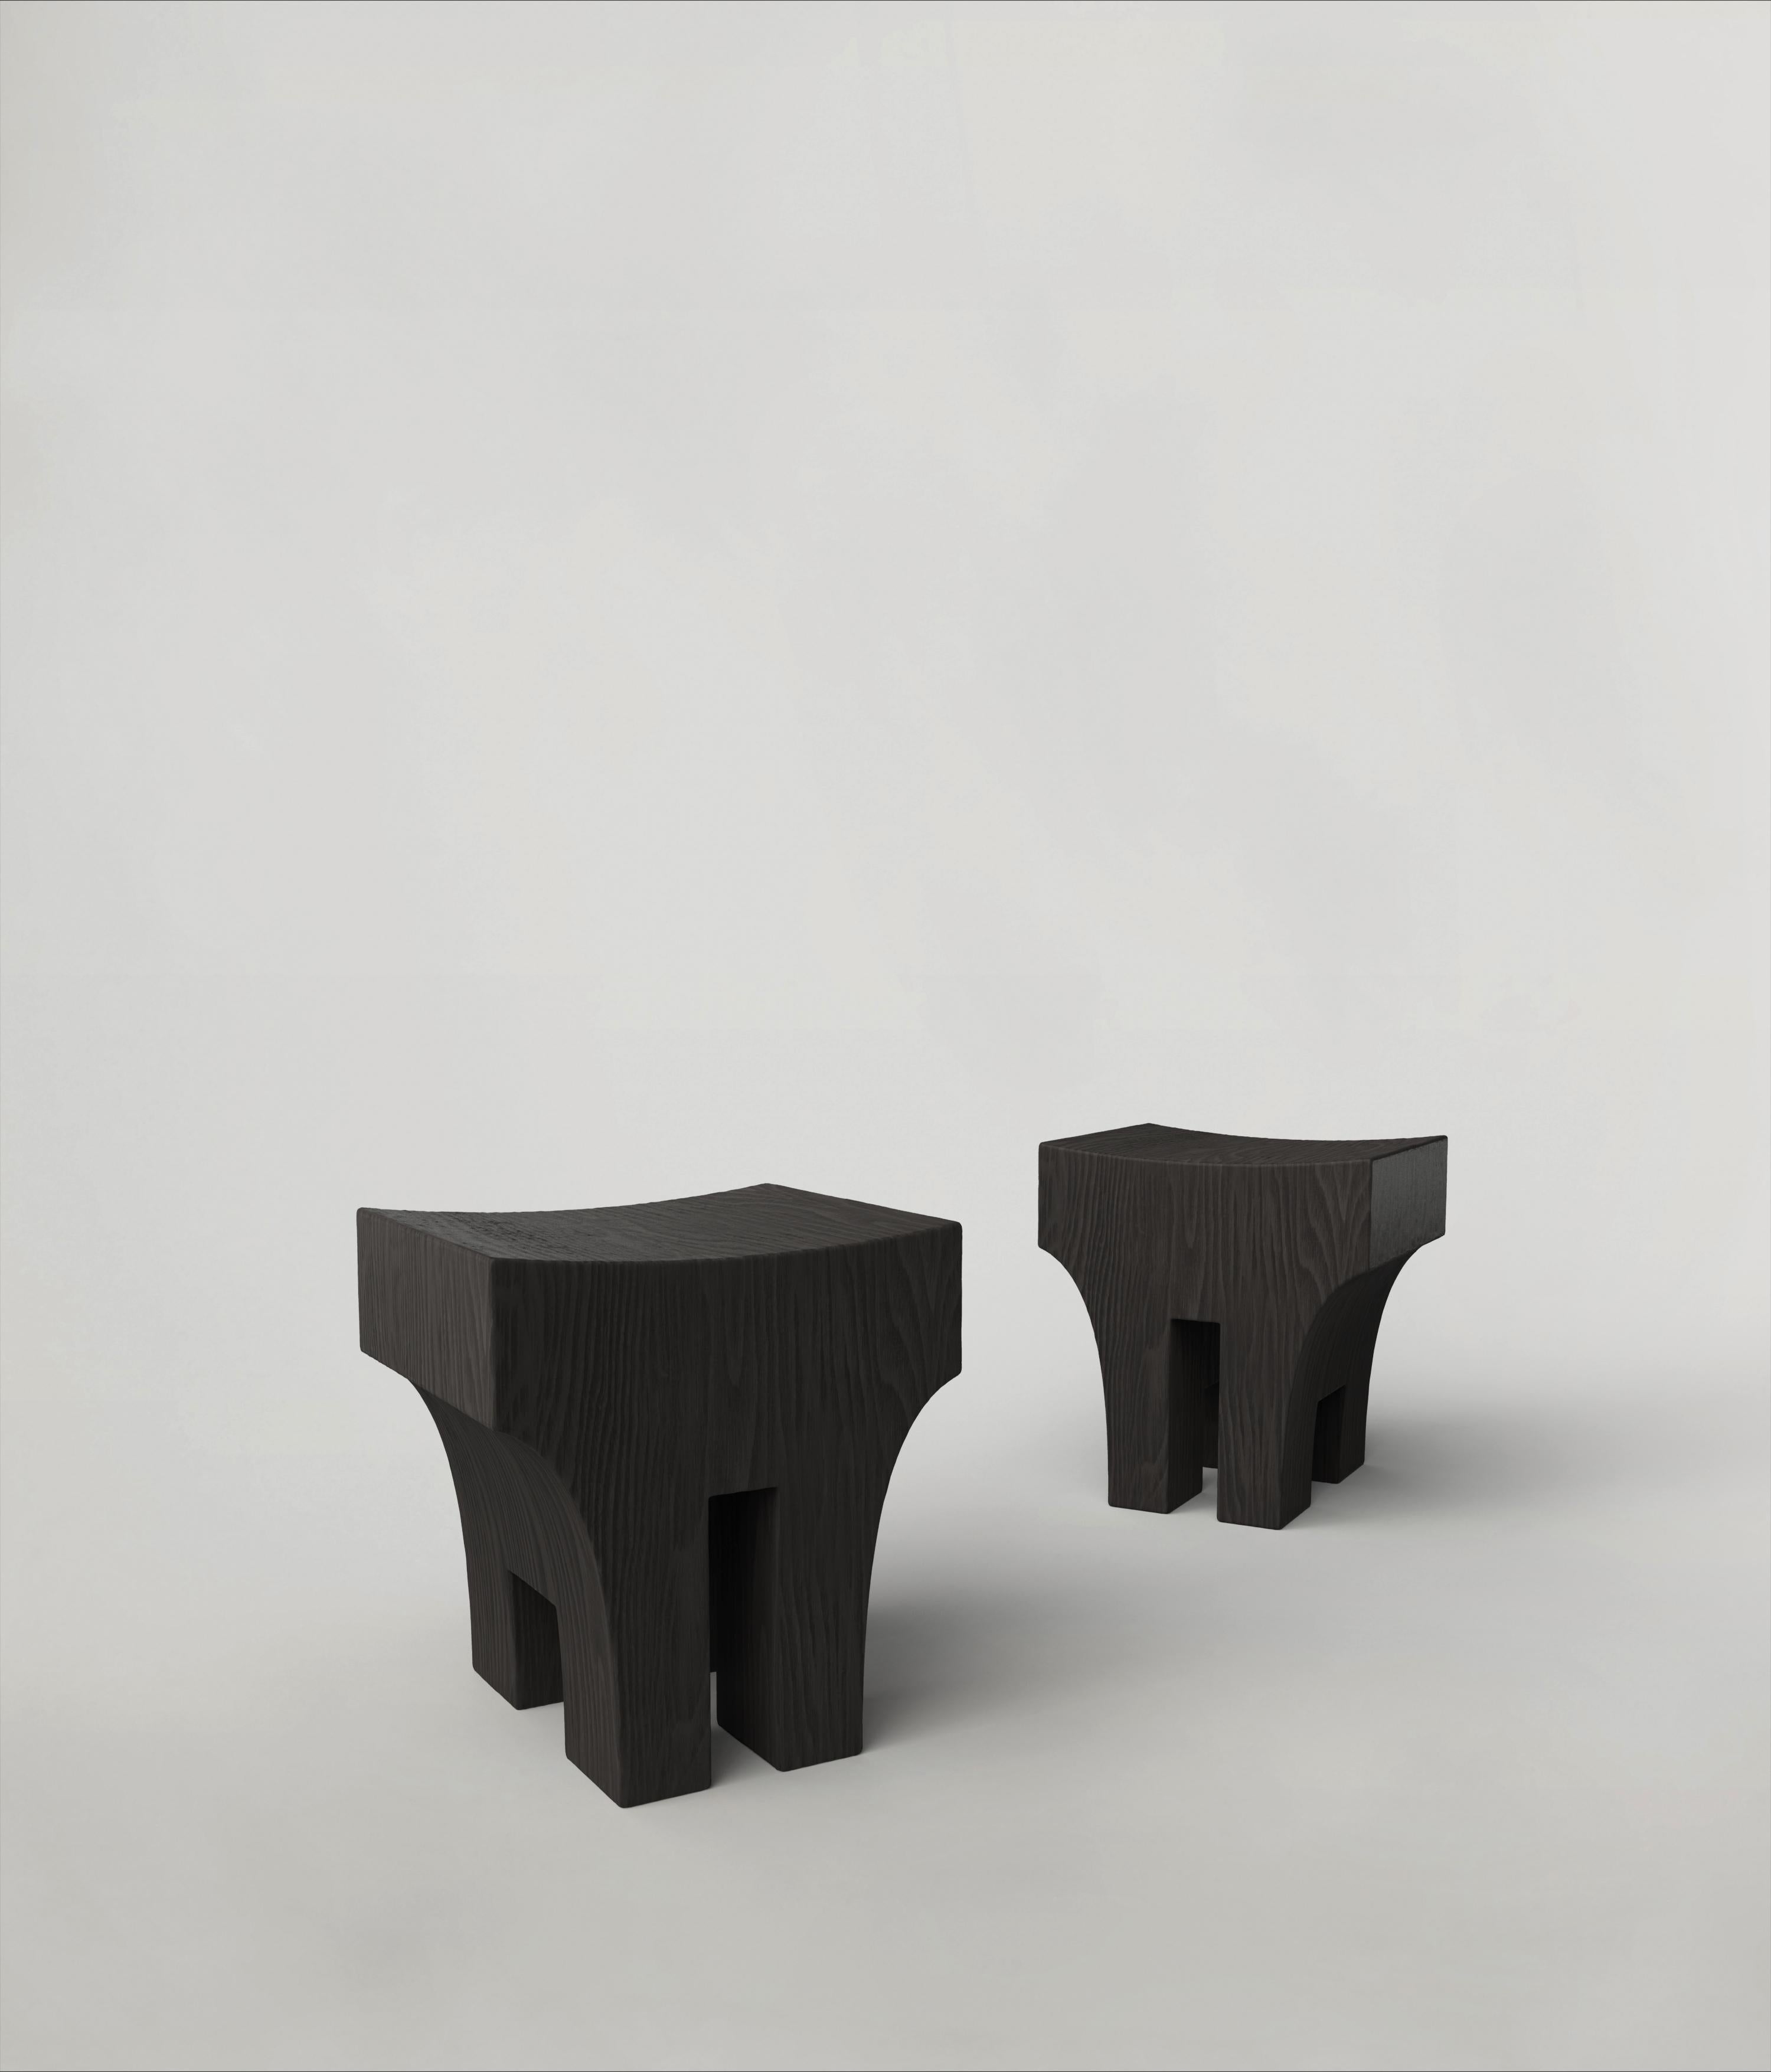 Set of 2 Mhono V1 stools by Edizione Limitata
Limited edition of 150 pieces. Signed and numbered.
Dimensions: D 40 x W 35 x H 43 cm
Materials: charred cedar wood

This contemporary collection is a product of Italian craftmanship, starting